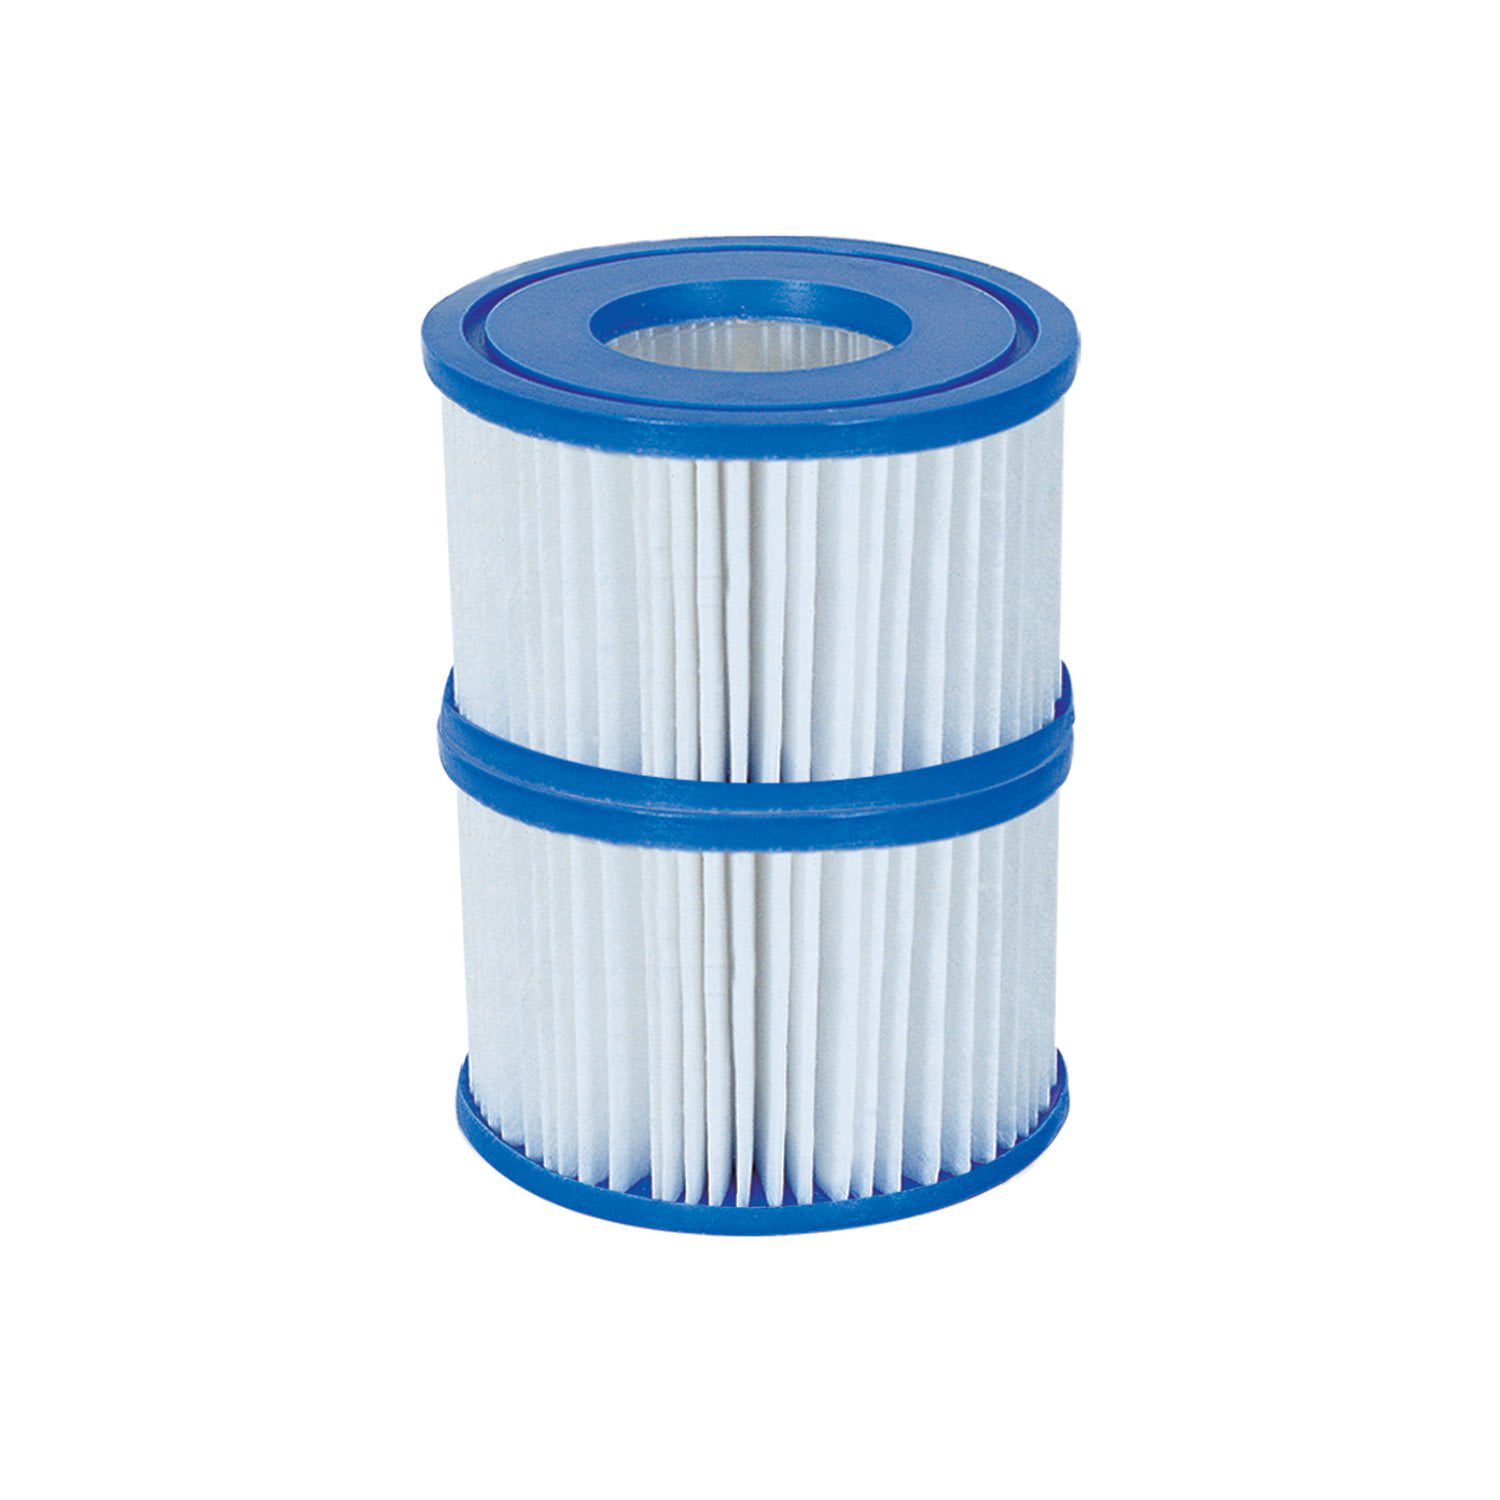 SaluSpa Spa Filter Replacement Cartridge Type VI 58323E Two Filters Total 